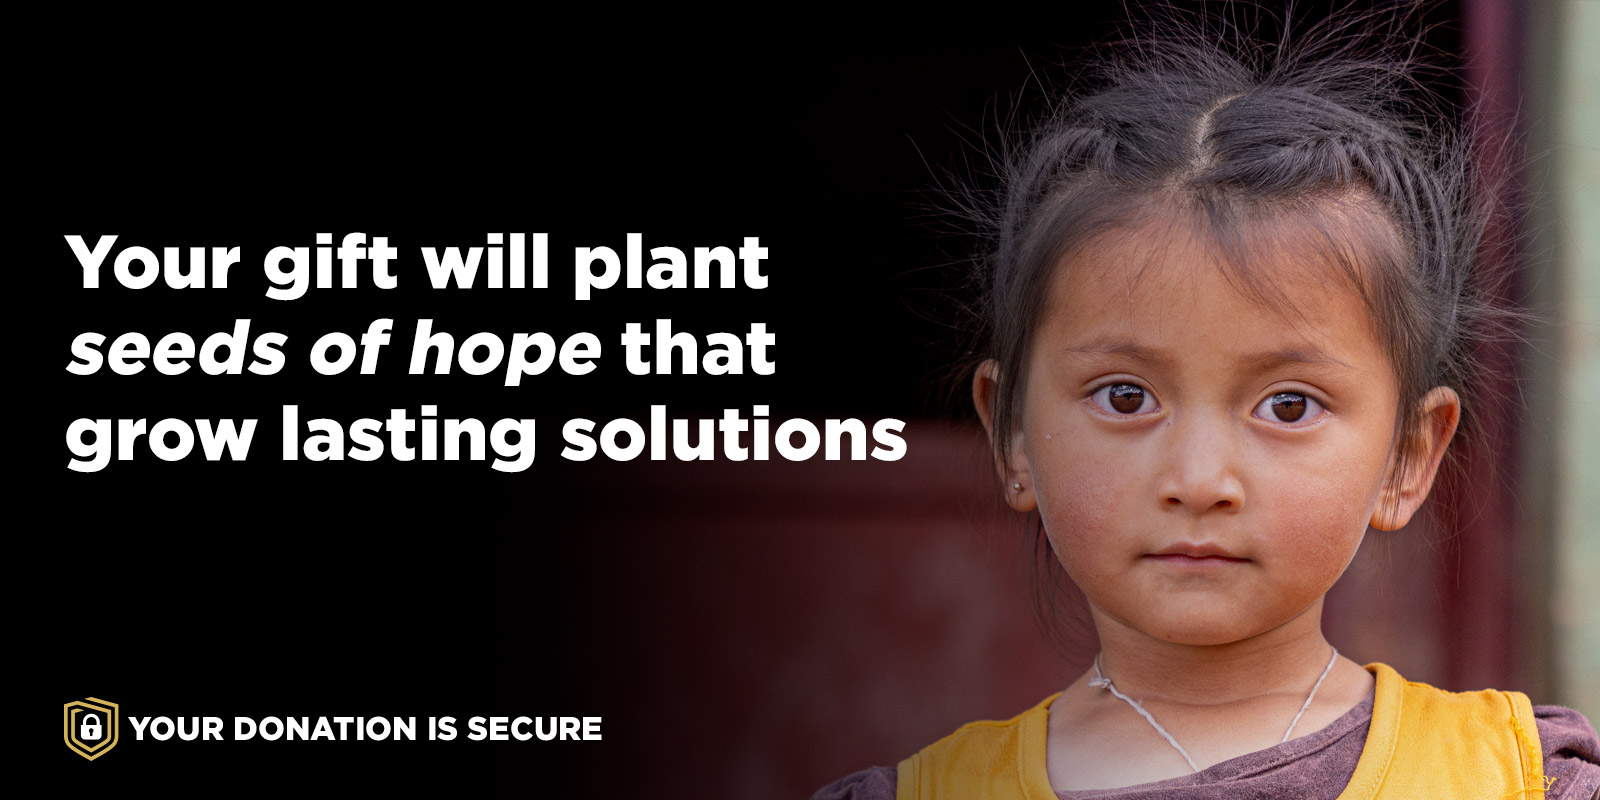 Your gift will plant seeds of hope that grow lasting solutions.